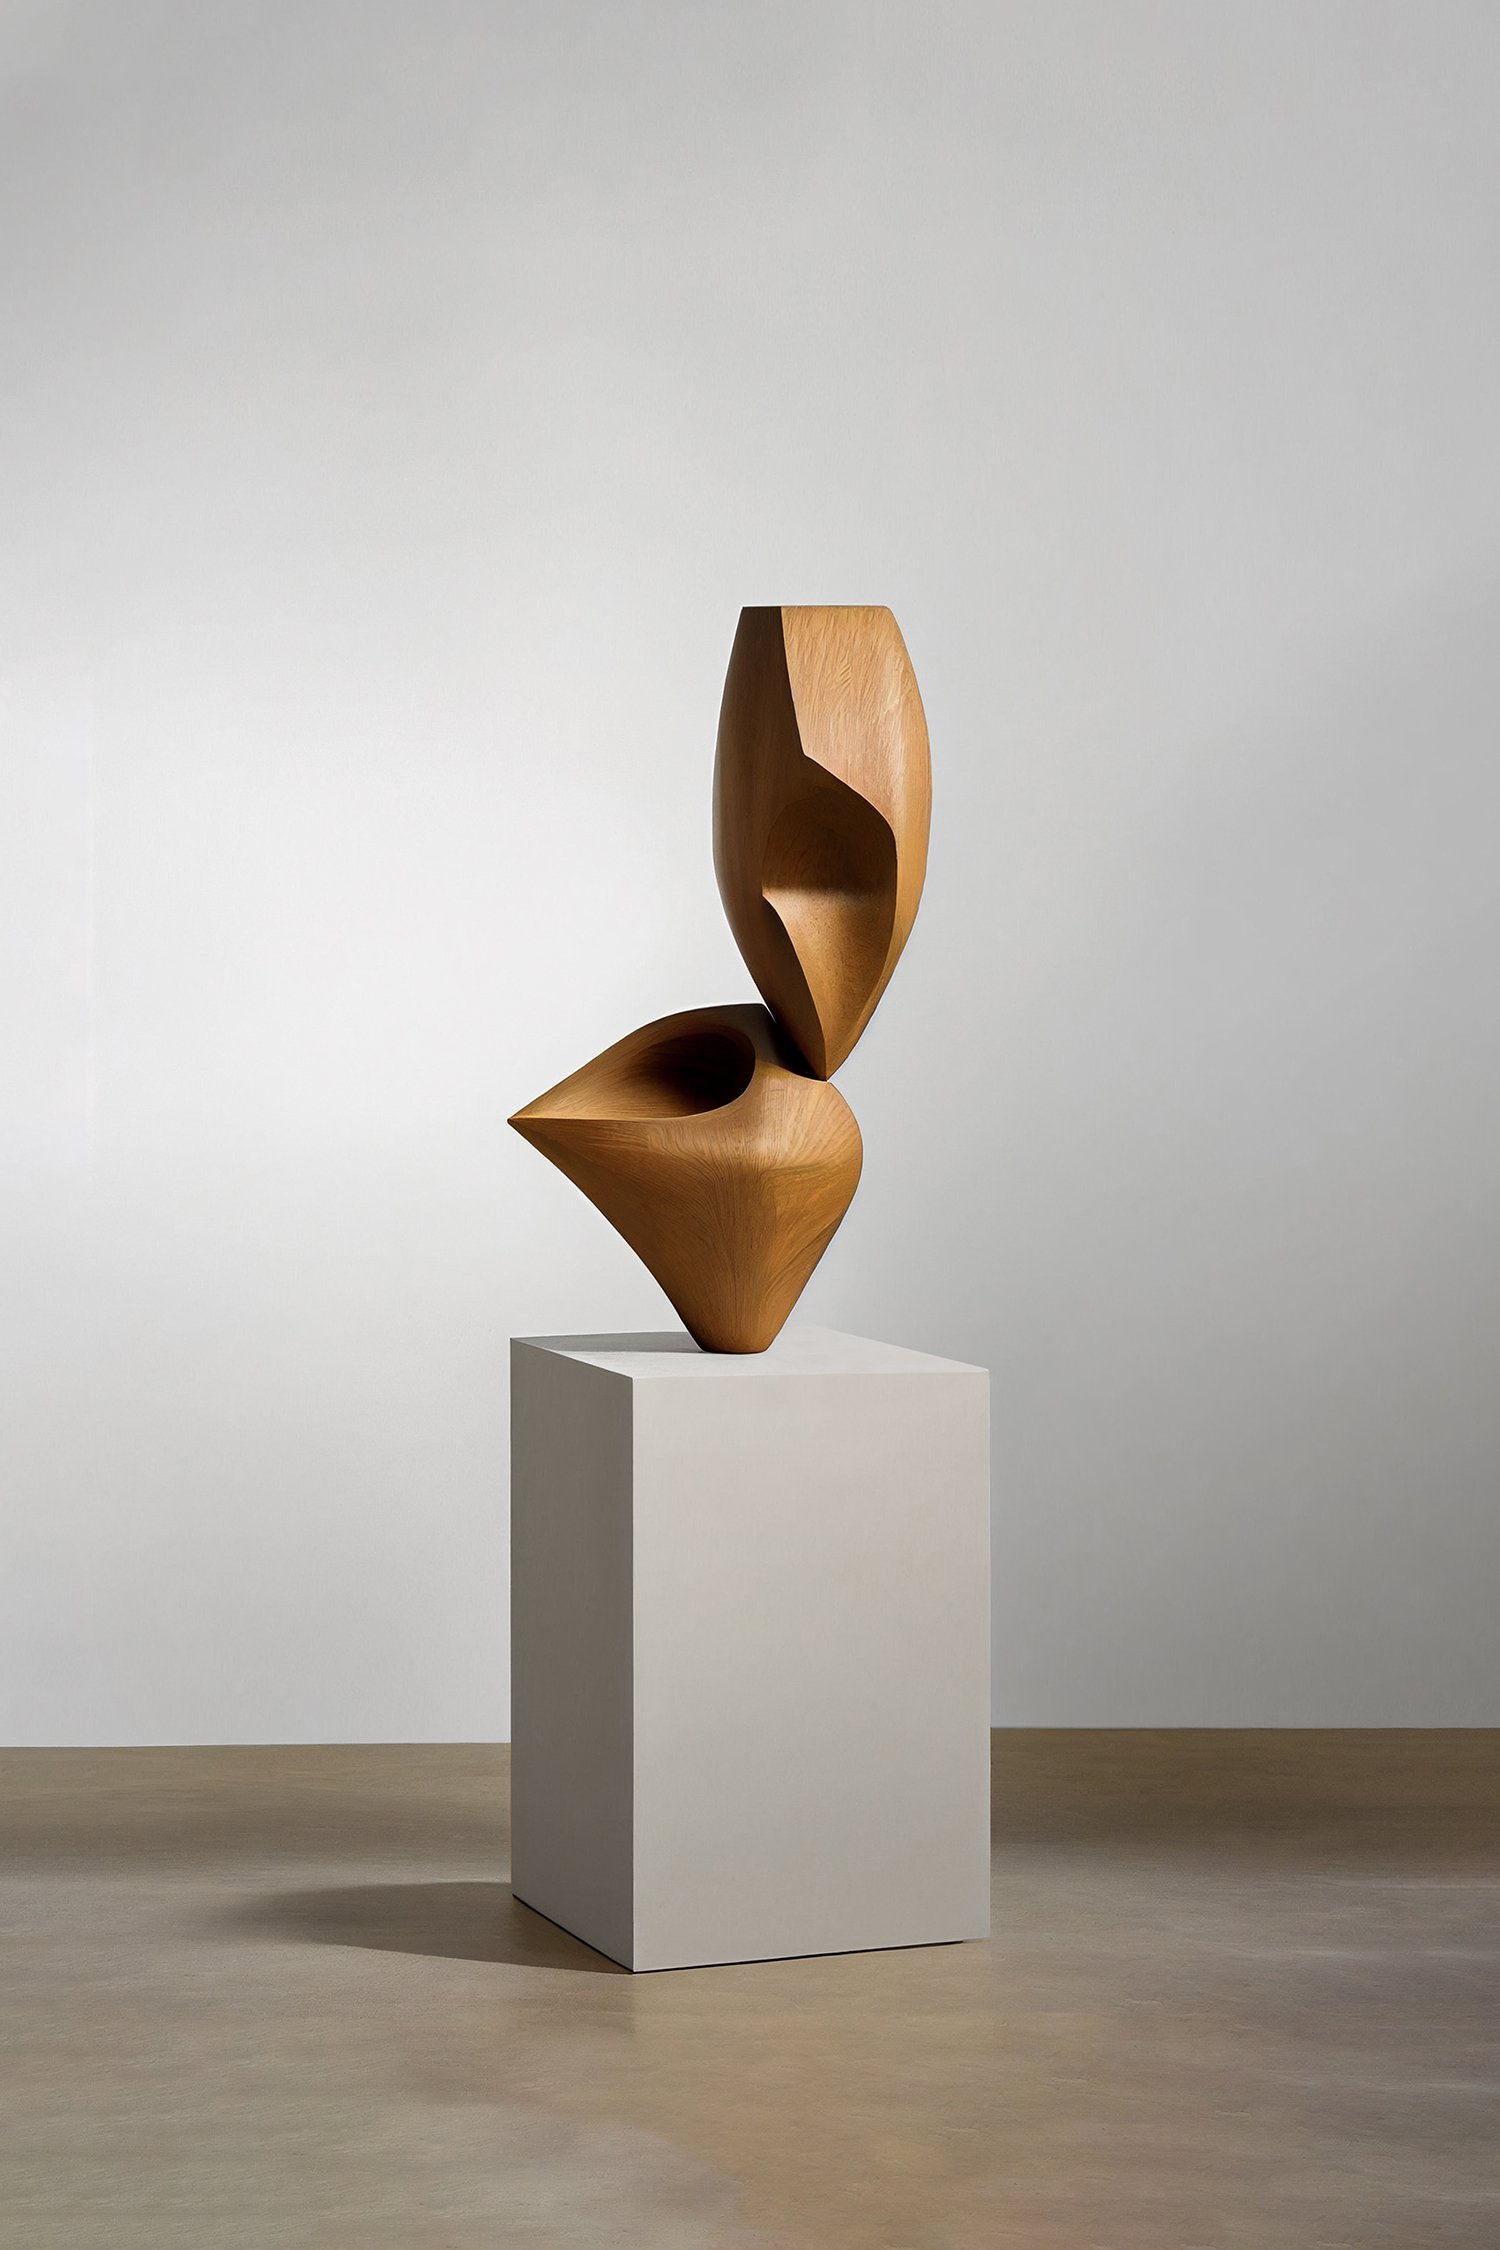 Biomorphic Carved Wood Sculpture in the style of Isamu Noguchi, Unseen  Force by Joel Escalona — JOEL ESCALONA